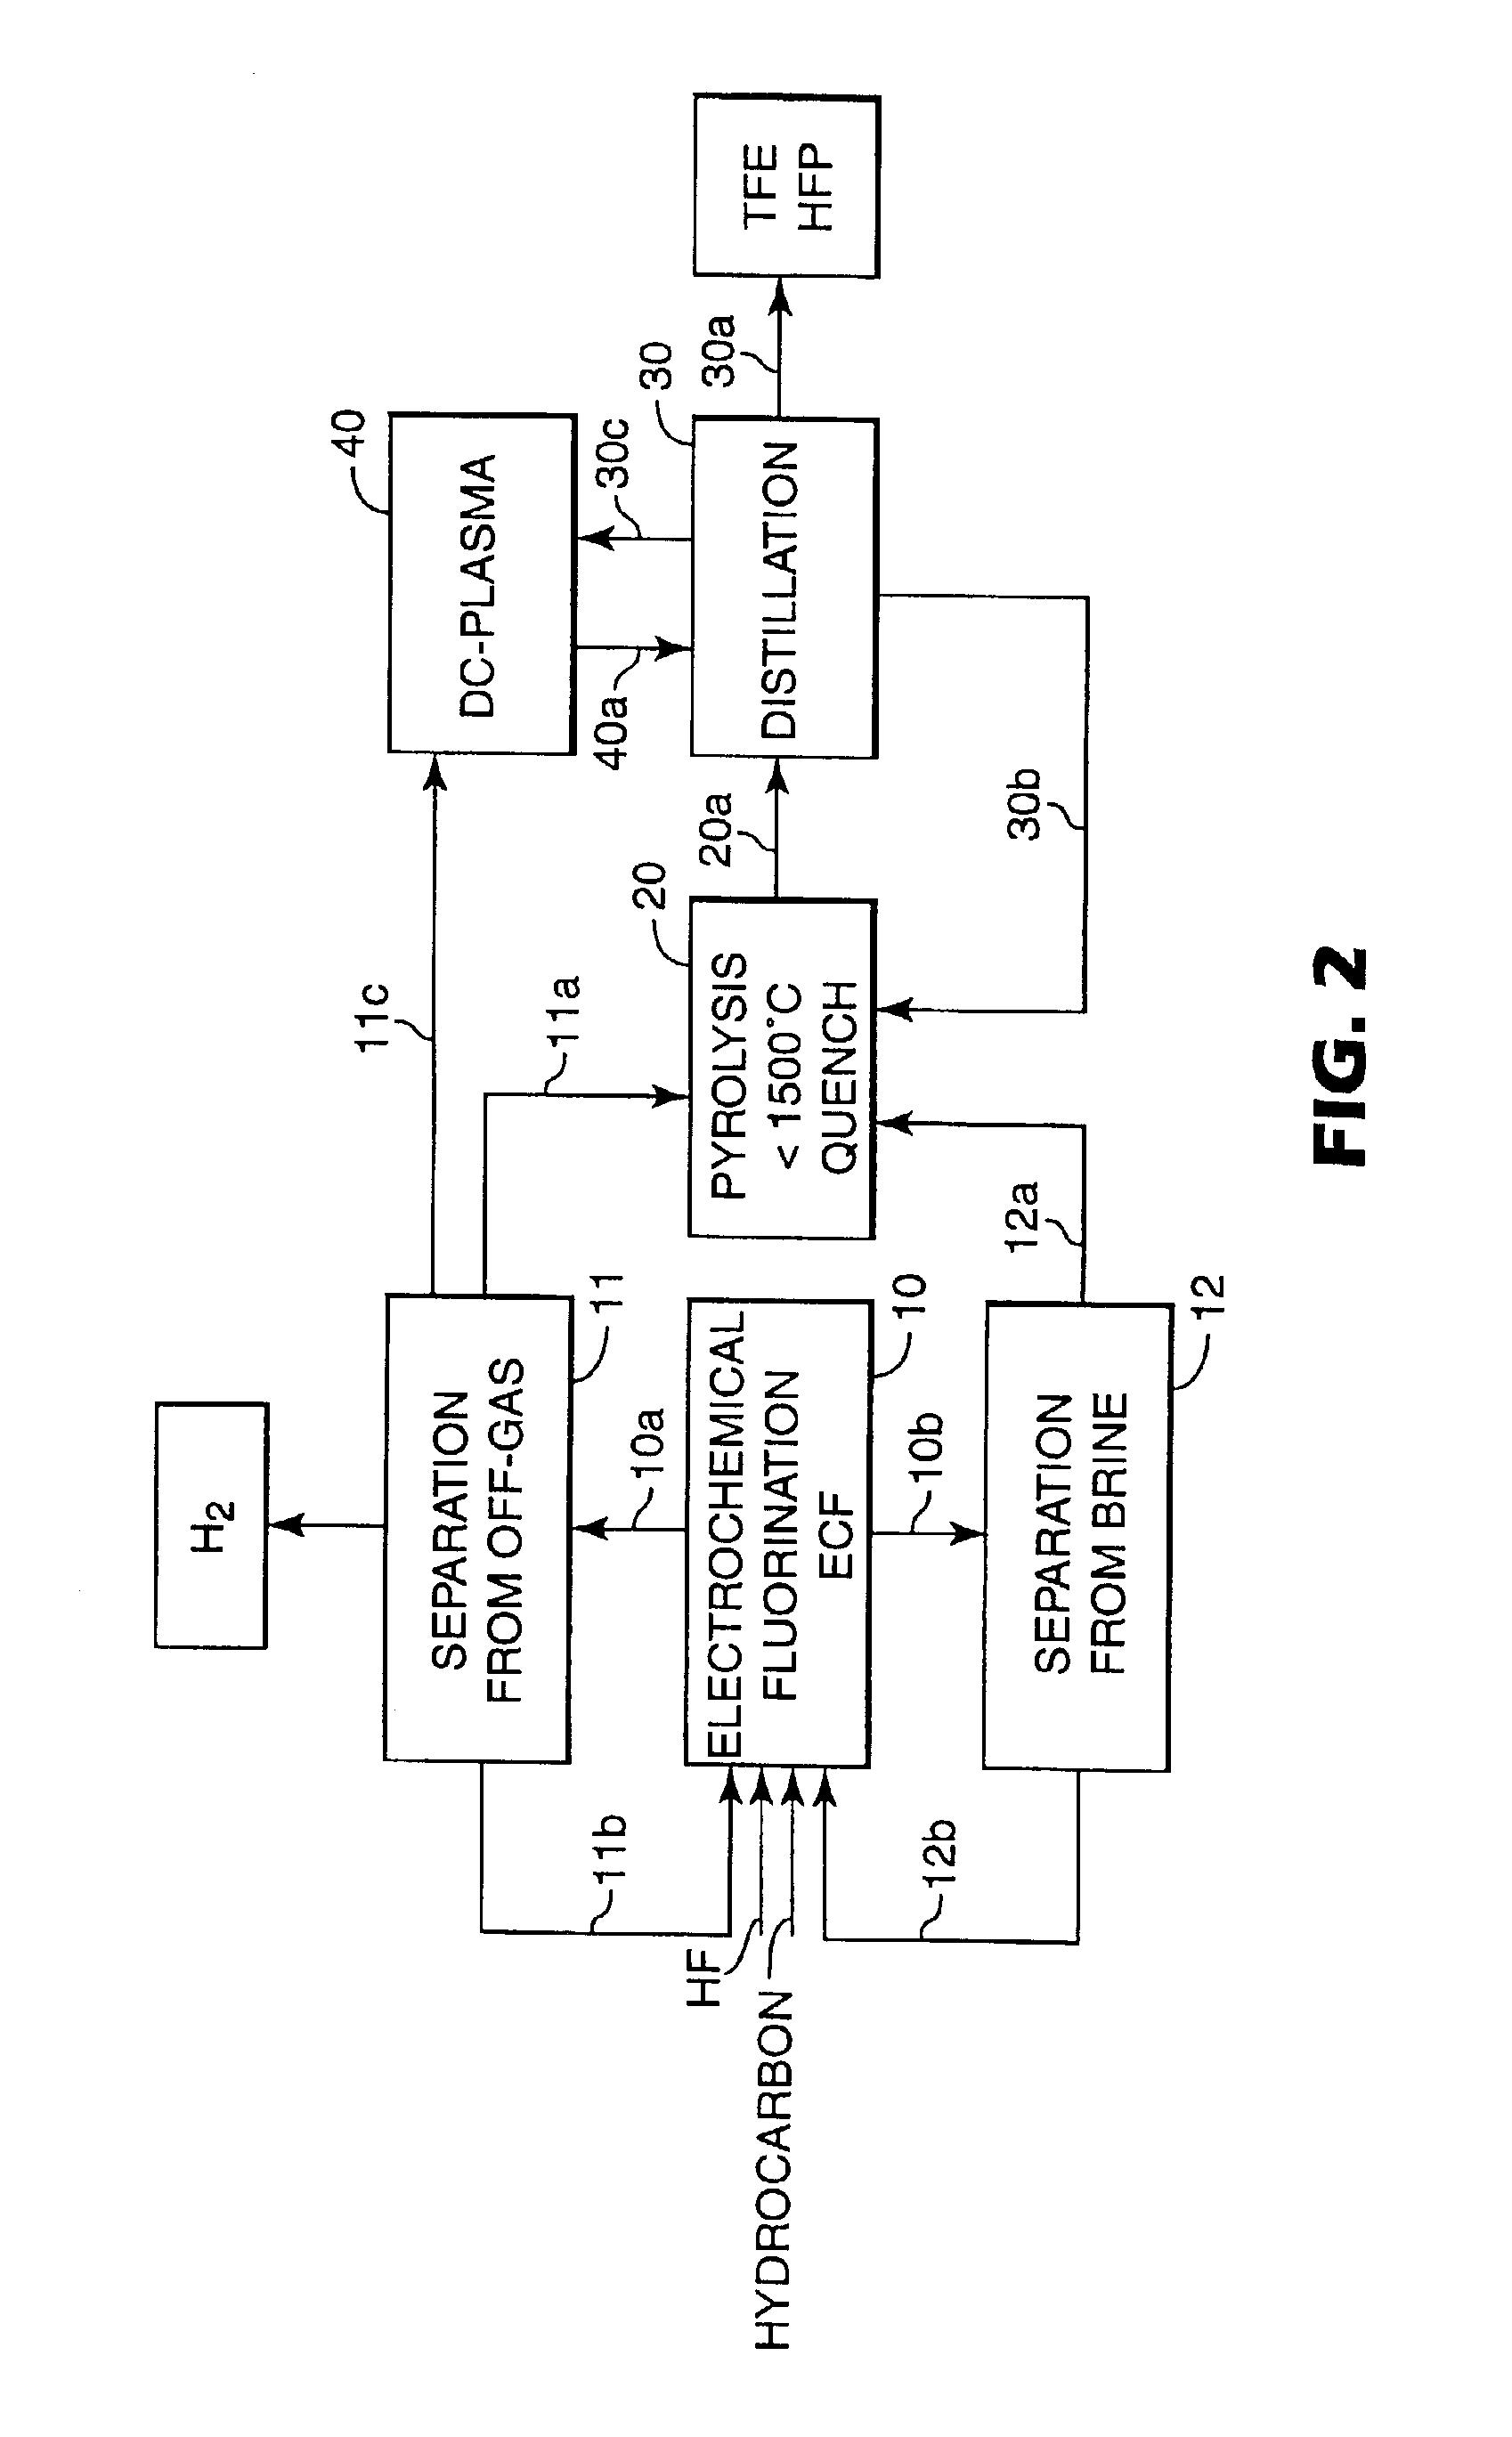 Process for manufacturing fluoroolefins